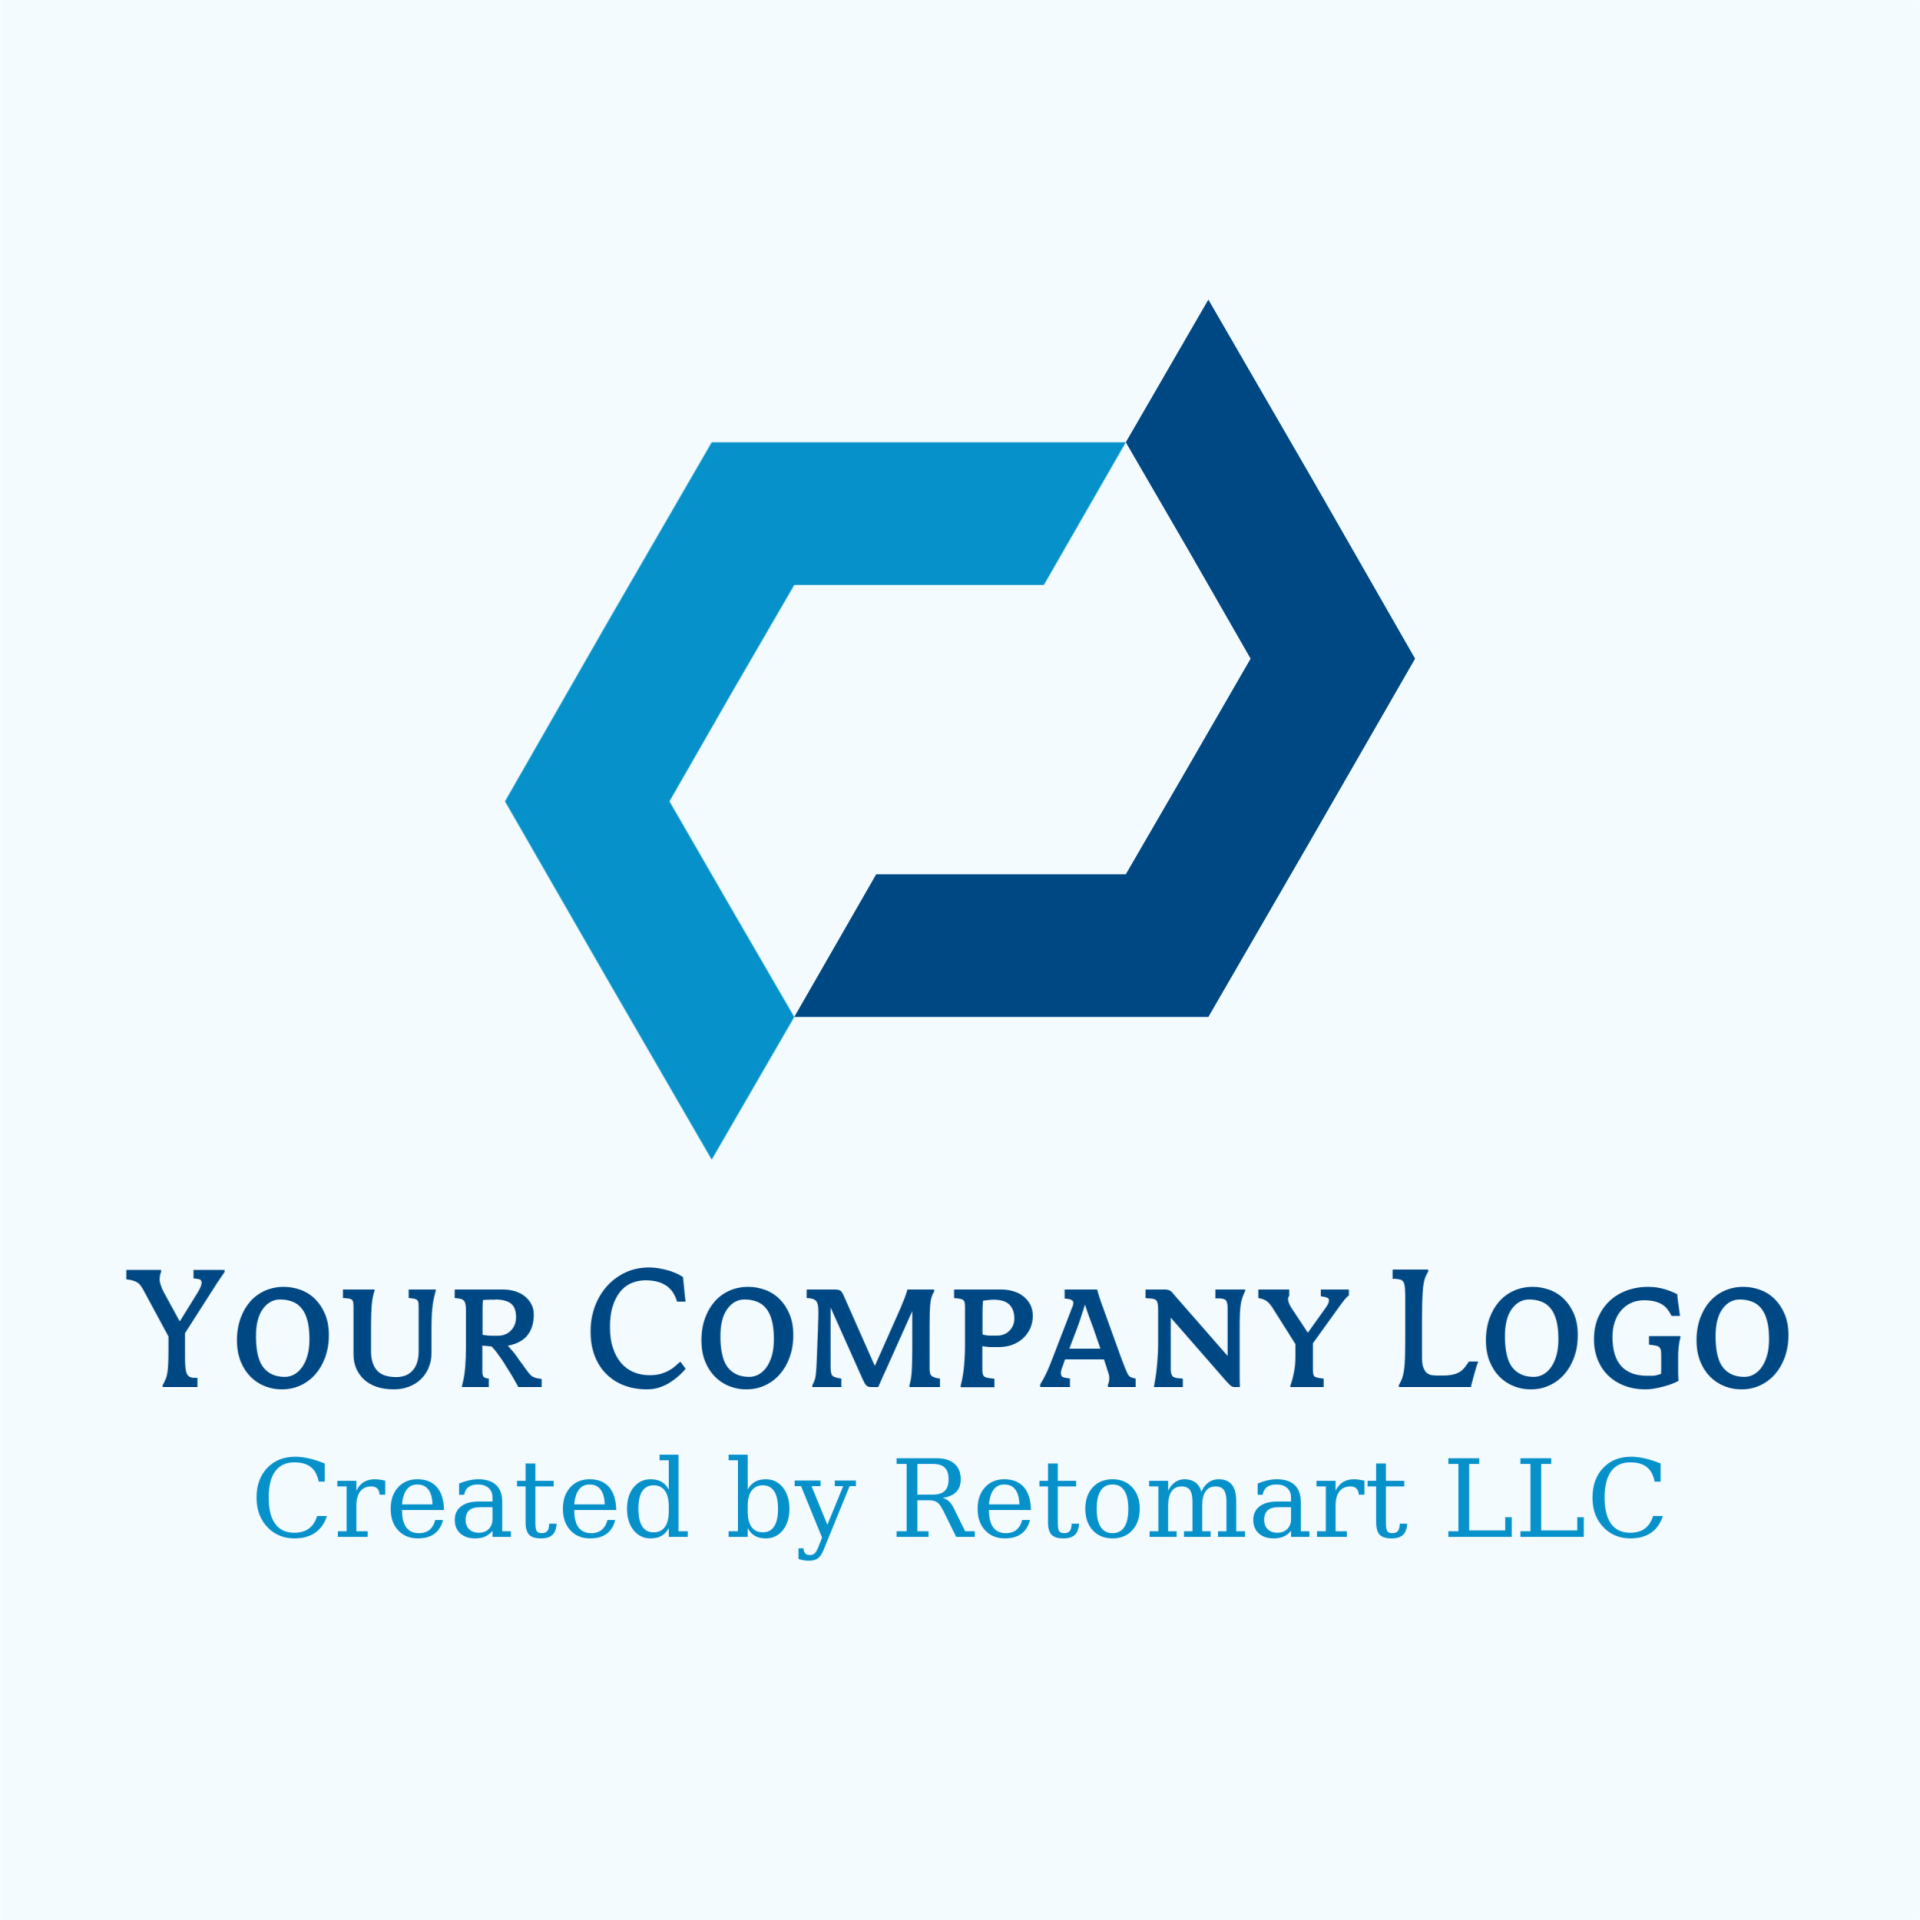 This is what your logo can look like with an icon as a symbol of your preference.